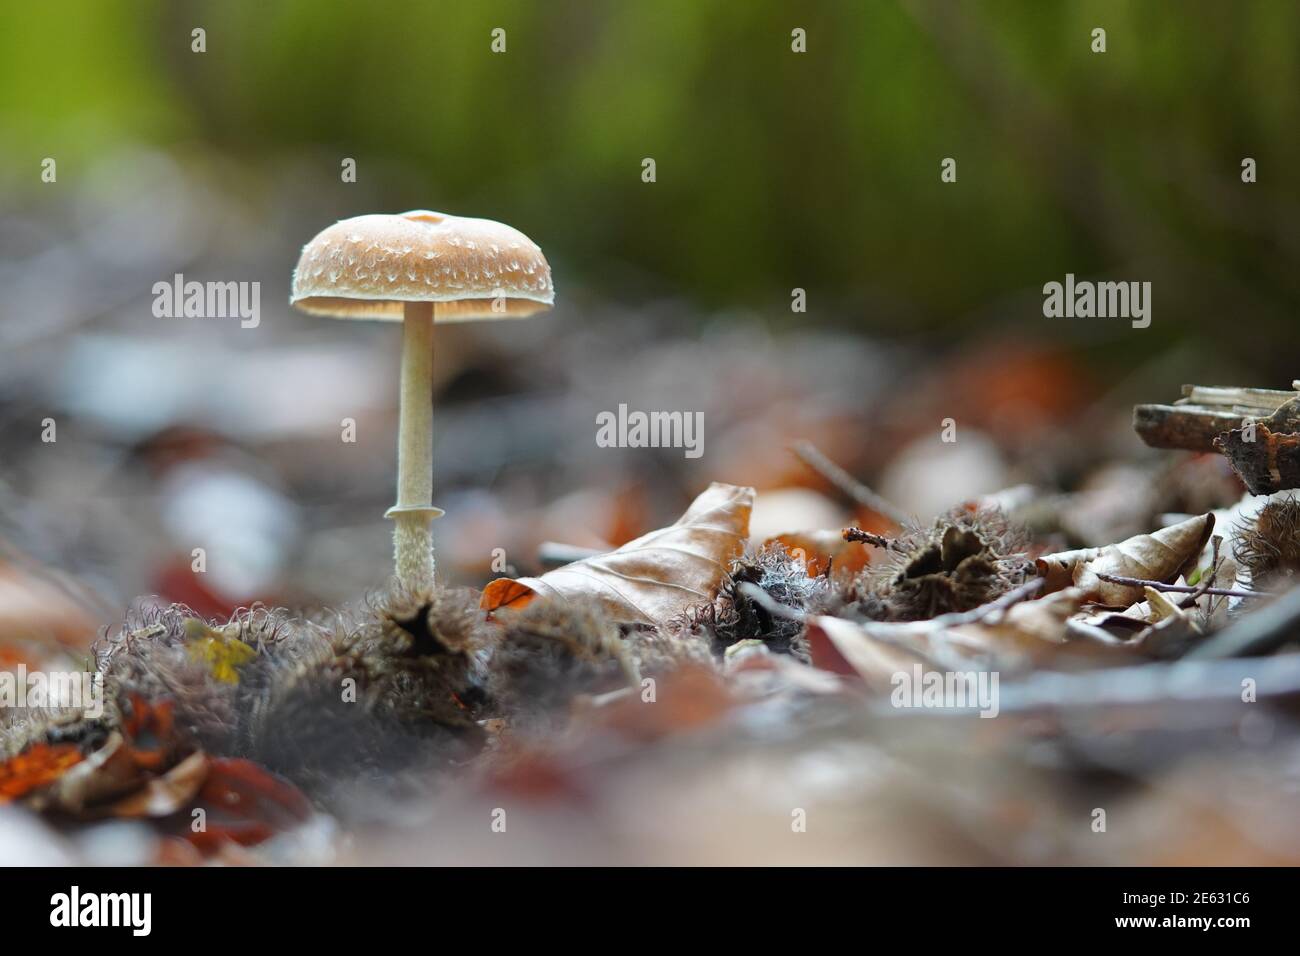 Mushroom with leaves in the forest Stock Photo